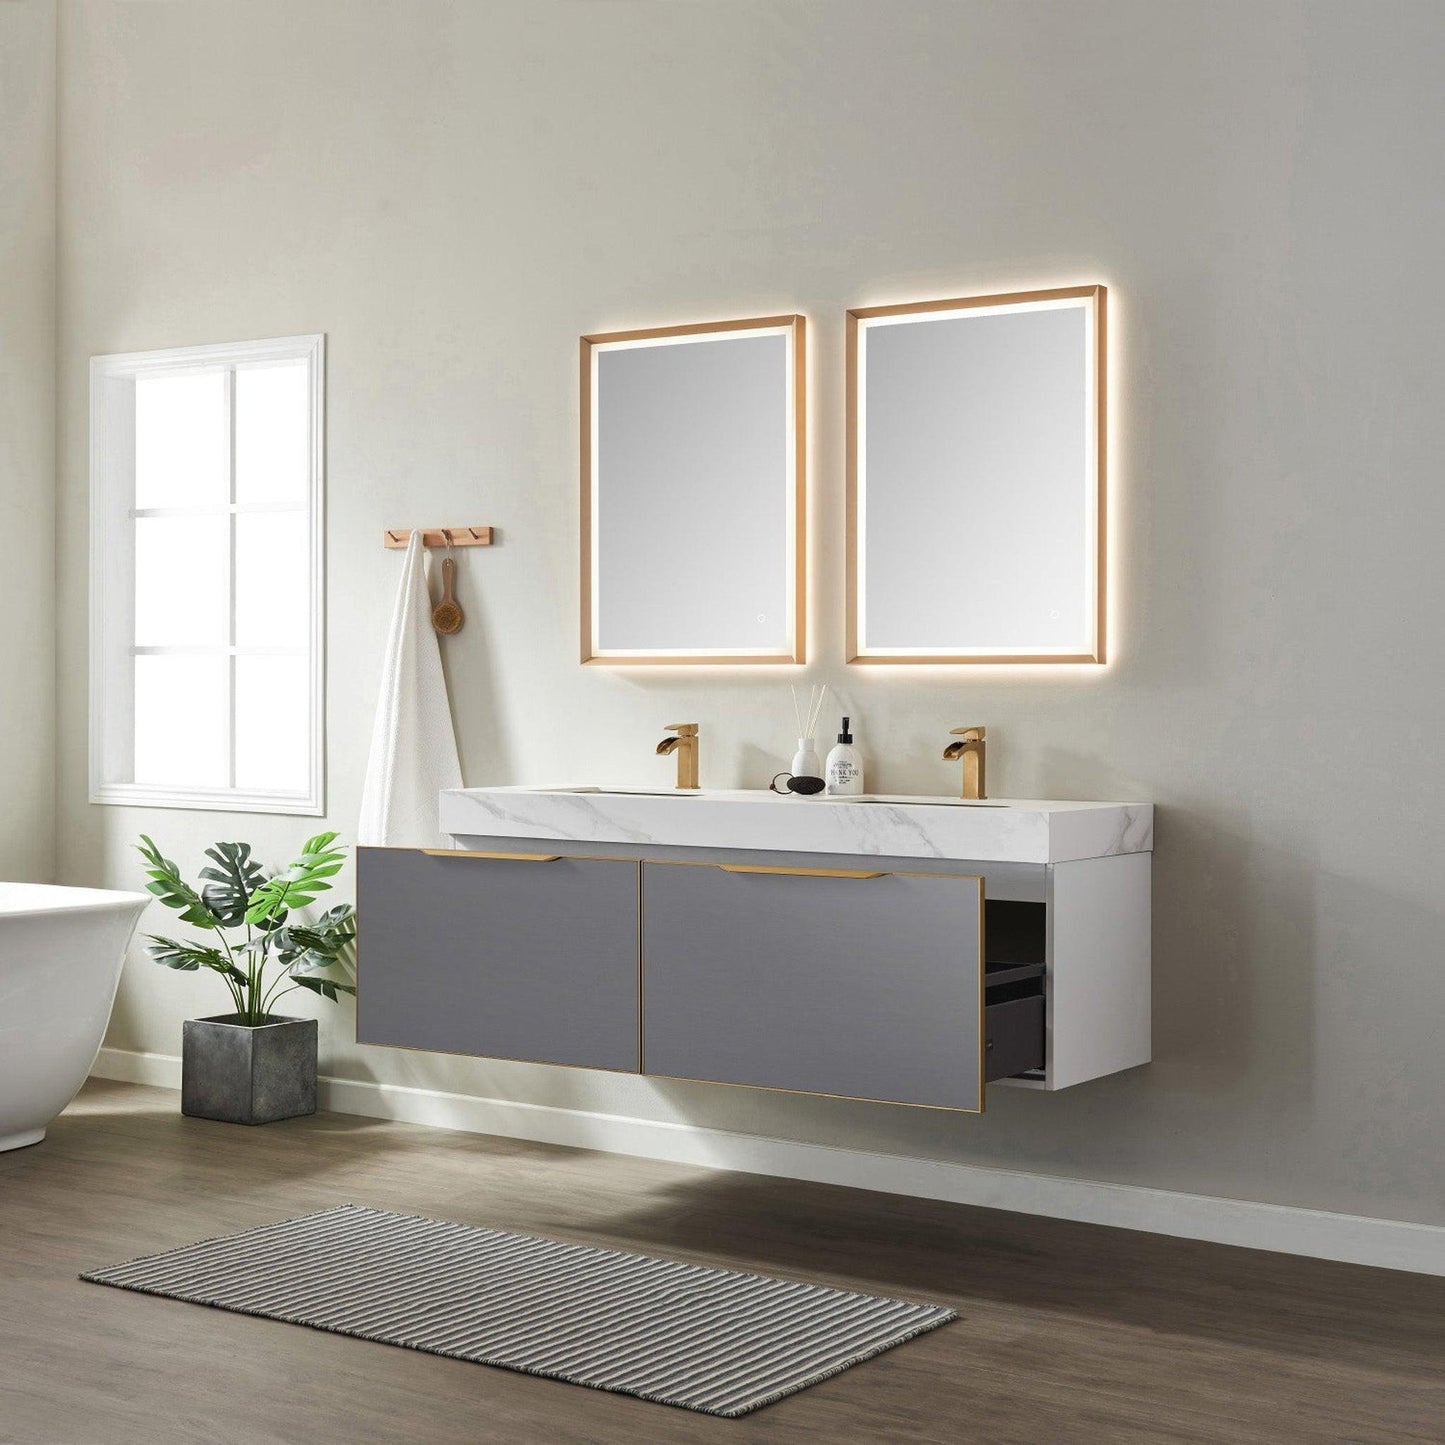 Vinnova Alicante 60" Double Vanity In Elegant Grey With White Sintered Stone Countertop And Undermount Sink With Mirror